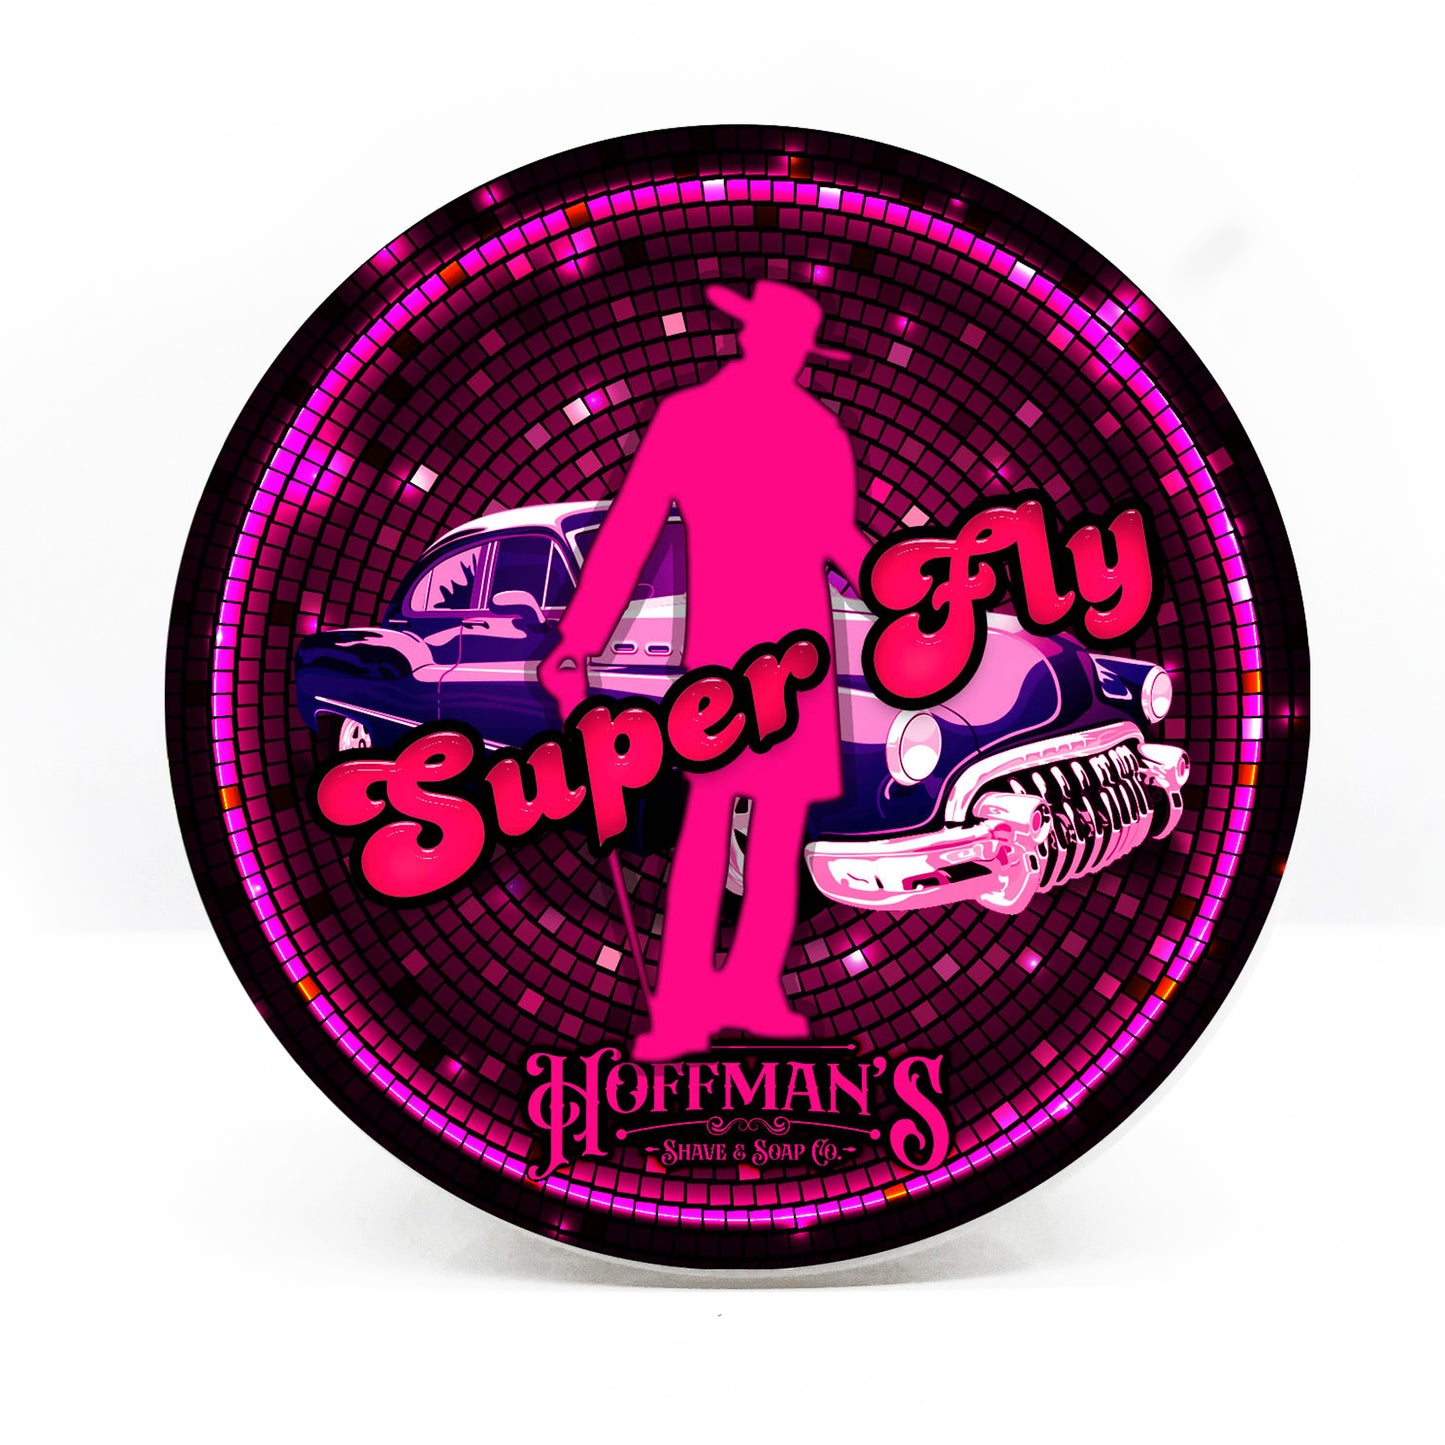 Super Fly Shave Soap | 4oz Shave Soap | Hoffman's Grooming